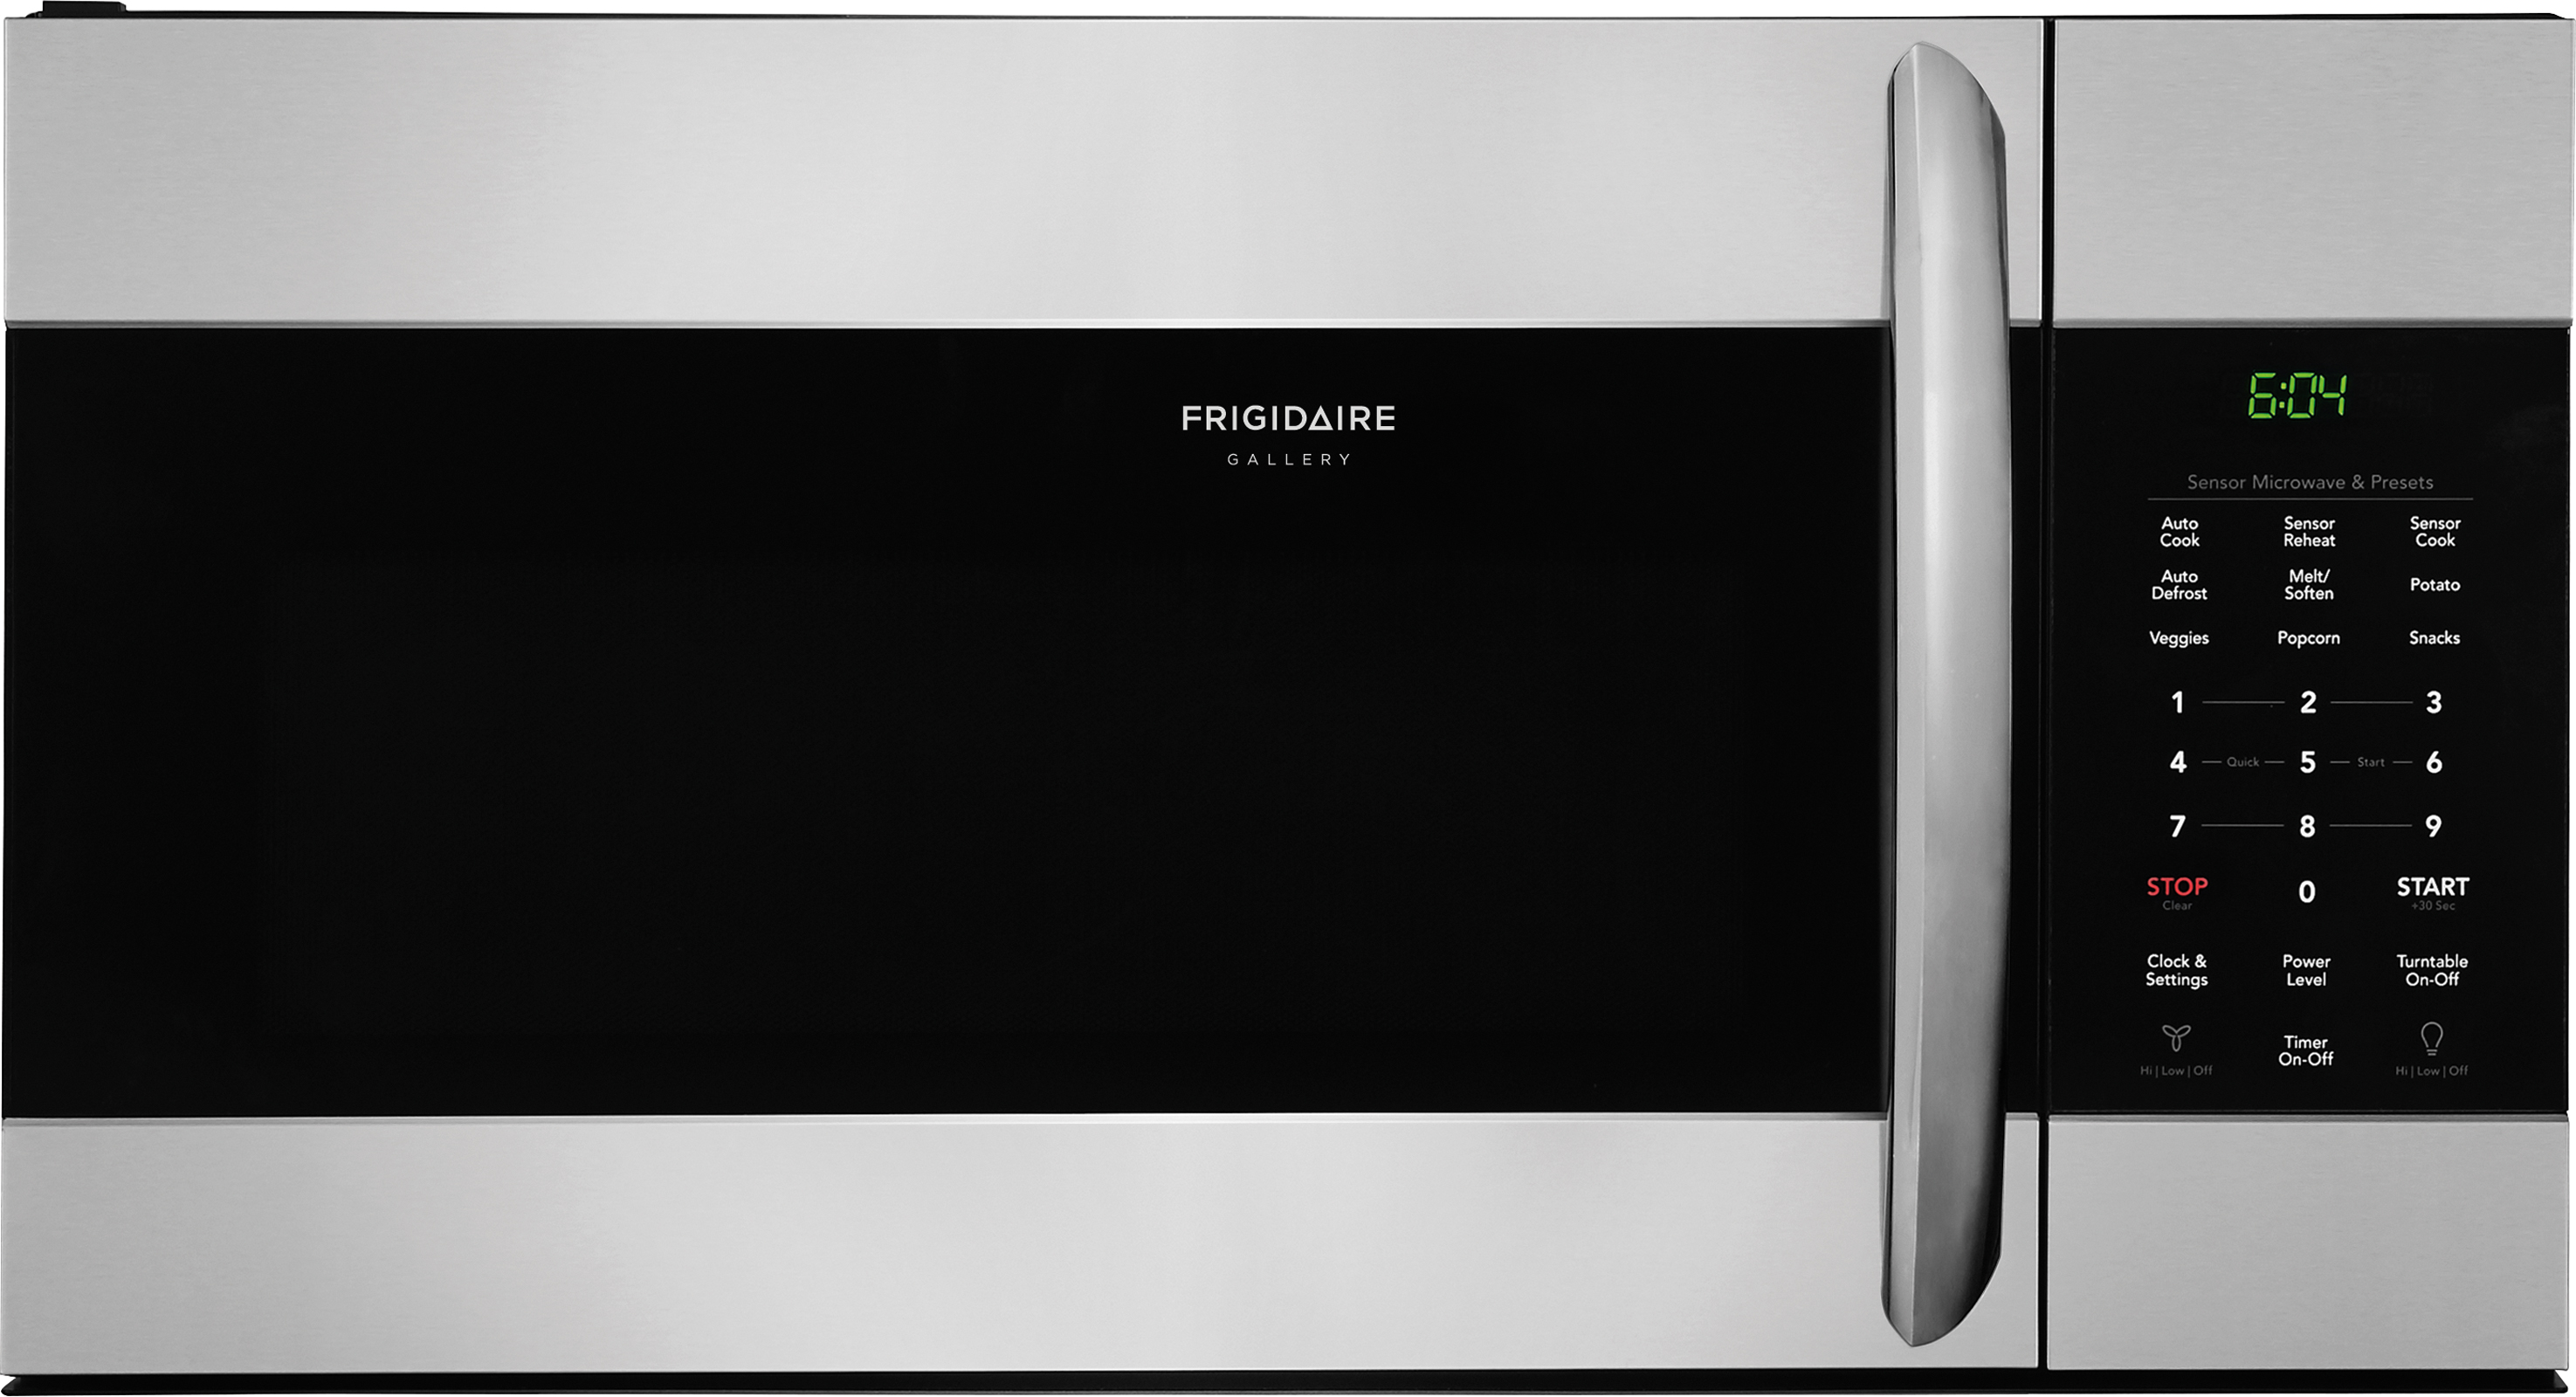 Frigidaire Gallery FGMV176NTF 1.7 cu. ft. Over-the-Range Microwave